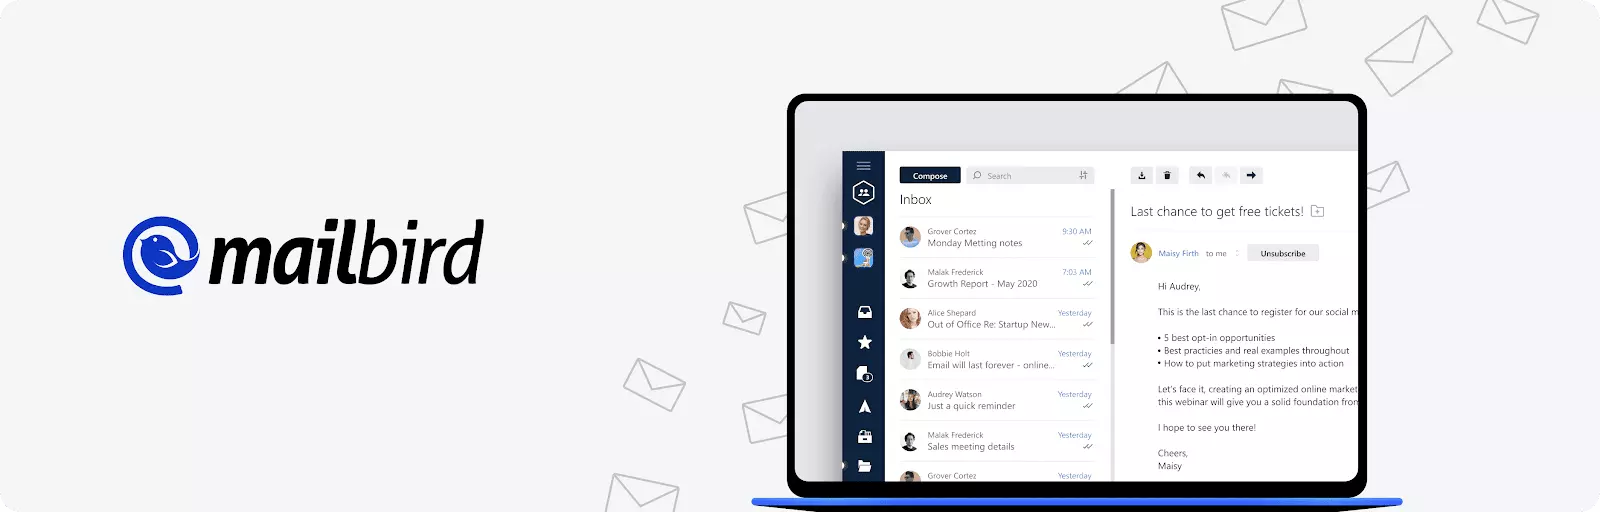 best email app for windows 10